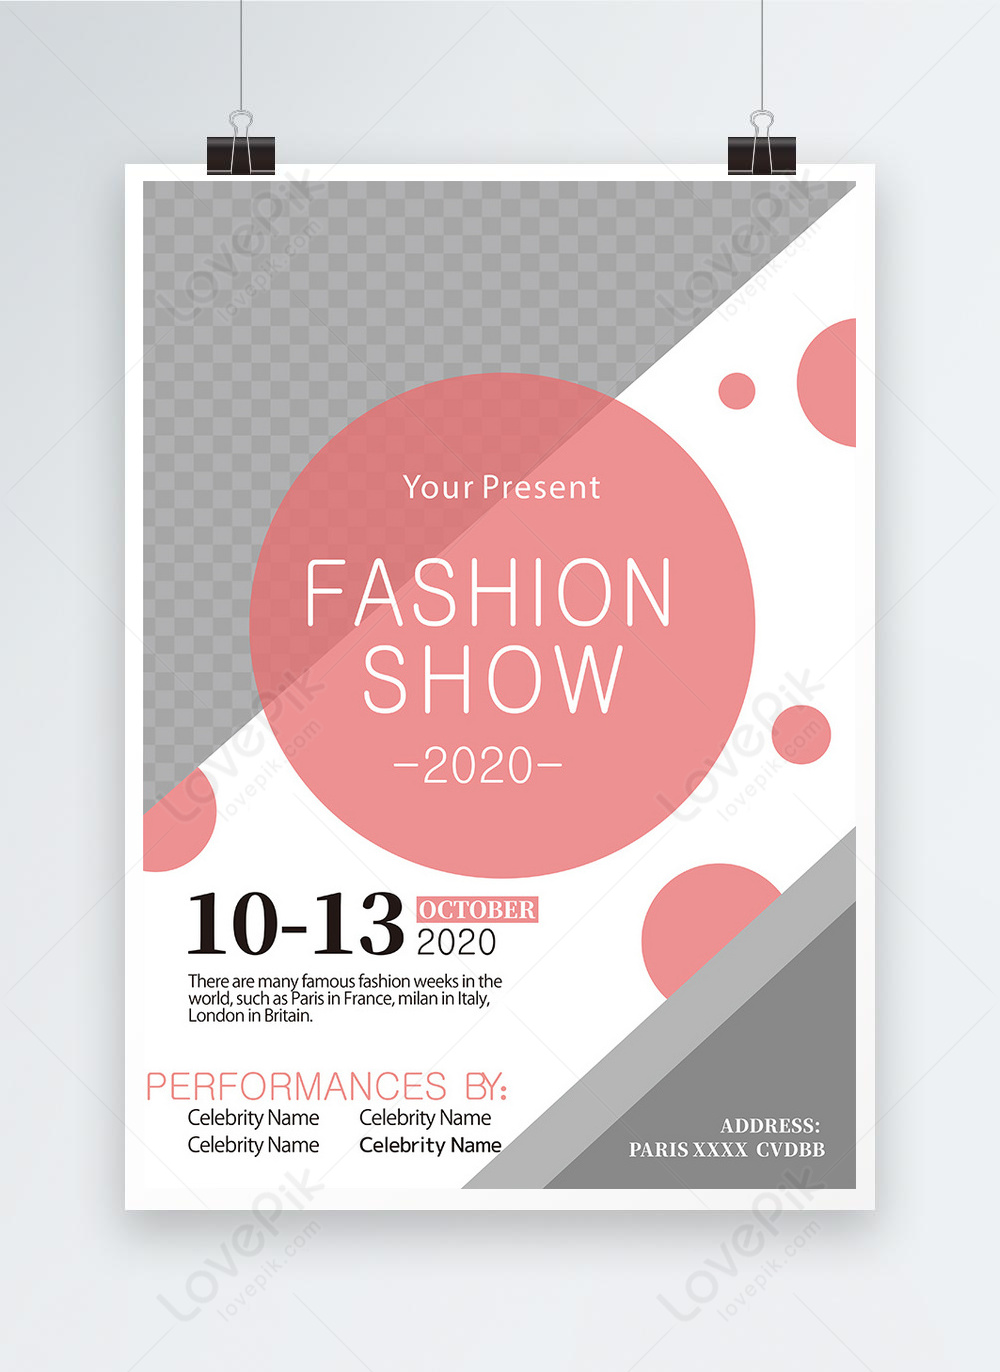 Fashion week fashion show trend pink poster template image_picture free ...